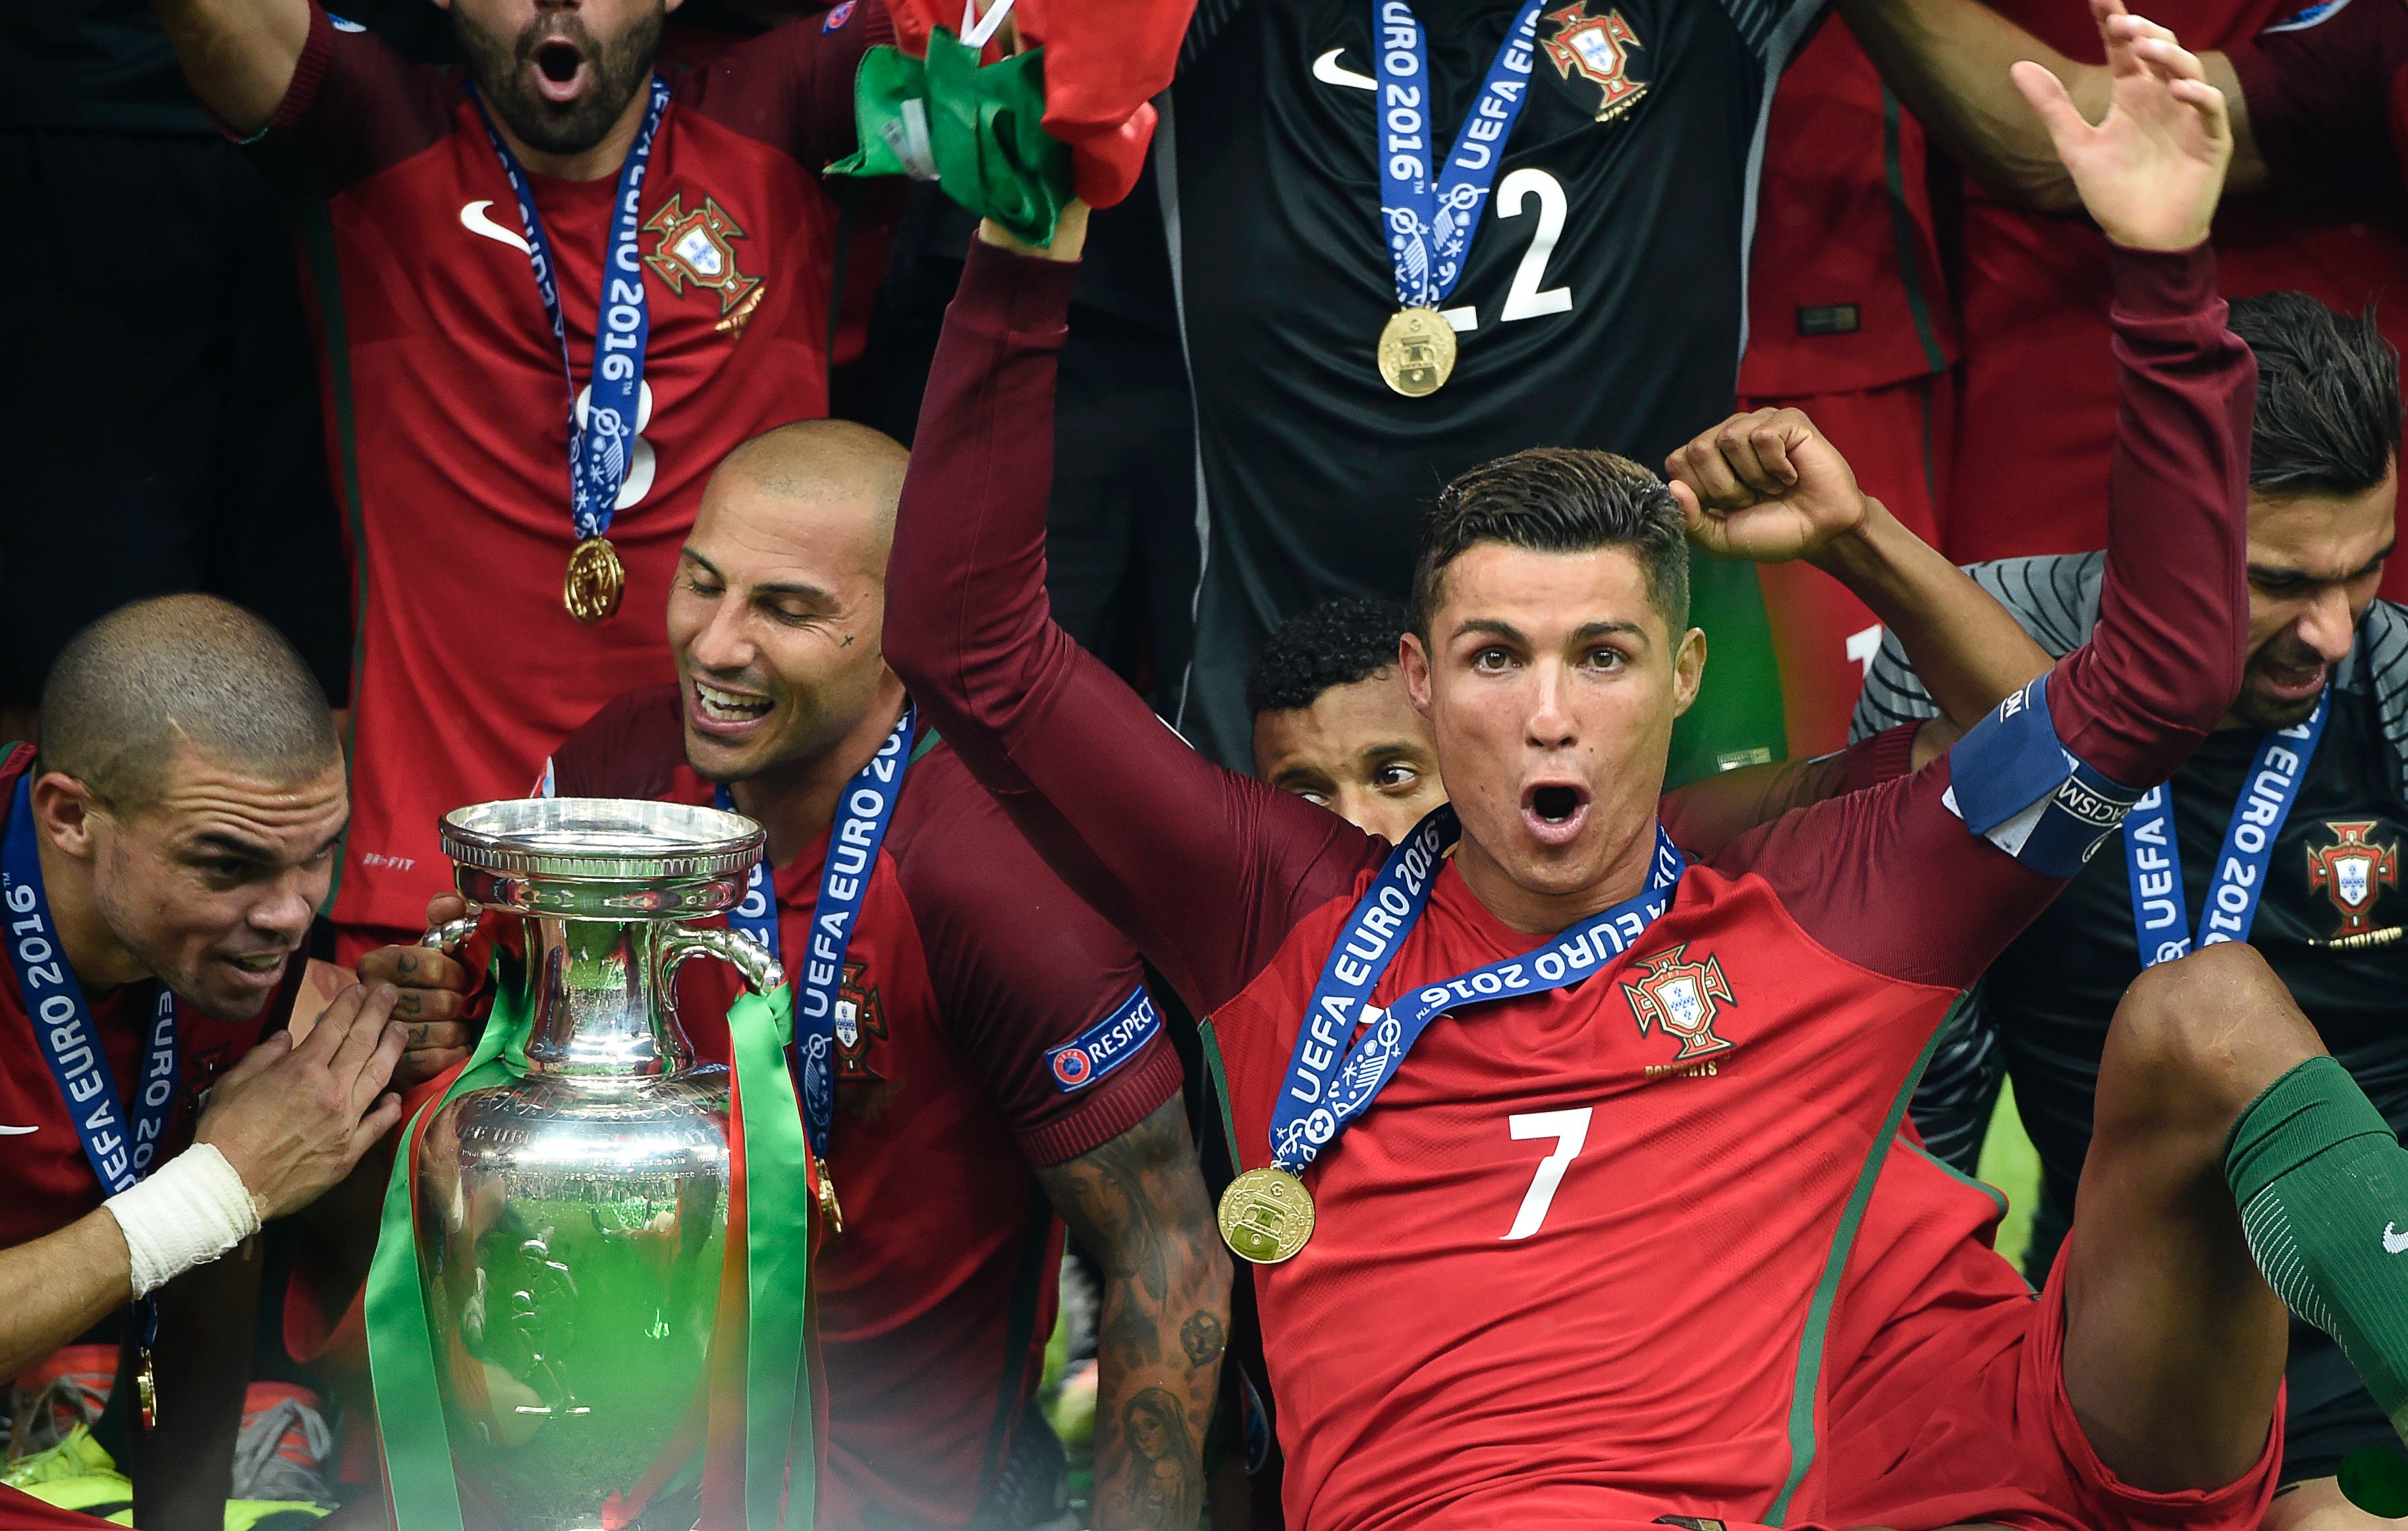 (From L) Portugal's defender Pepe, Portugal's forward Ricardo Quaresma and Portugal's forward Cristiano Ronaldo pose with the trophy as they celebrate after beating France during the Euro 2016 final football match at the Stade de France in Saint-Denis, north of Paris, on July 10, 2016. / AFP / PHILIPPE DESMAZES        (Photo credit should read PHILIPPE DESMAZES/AFP/Getty Images)